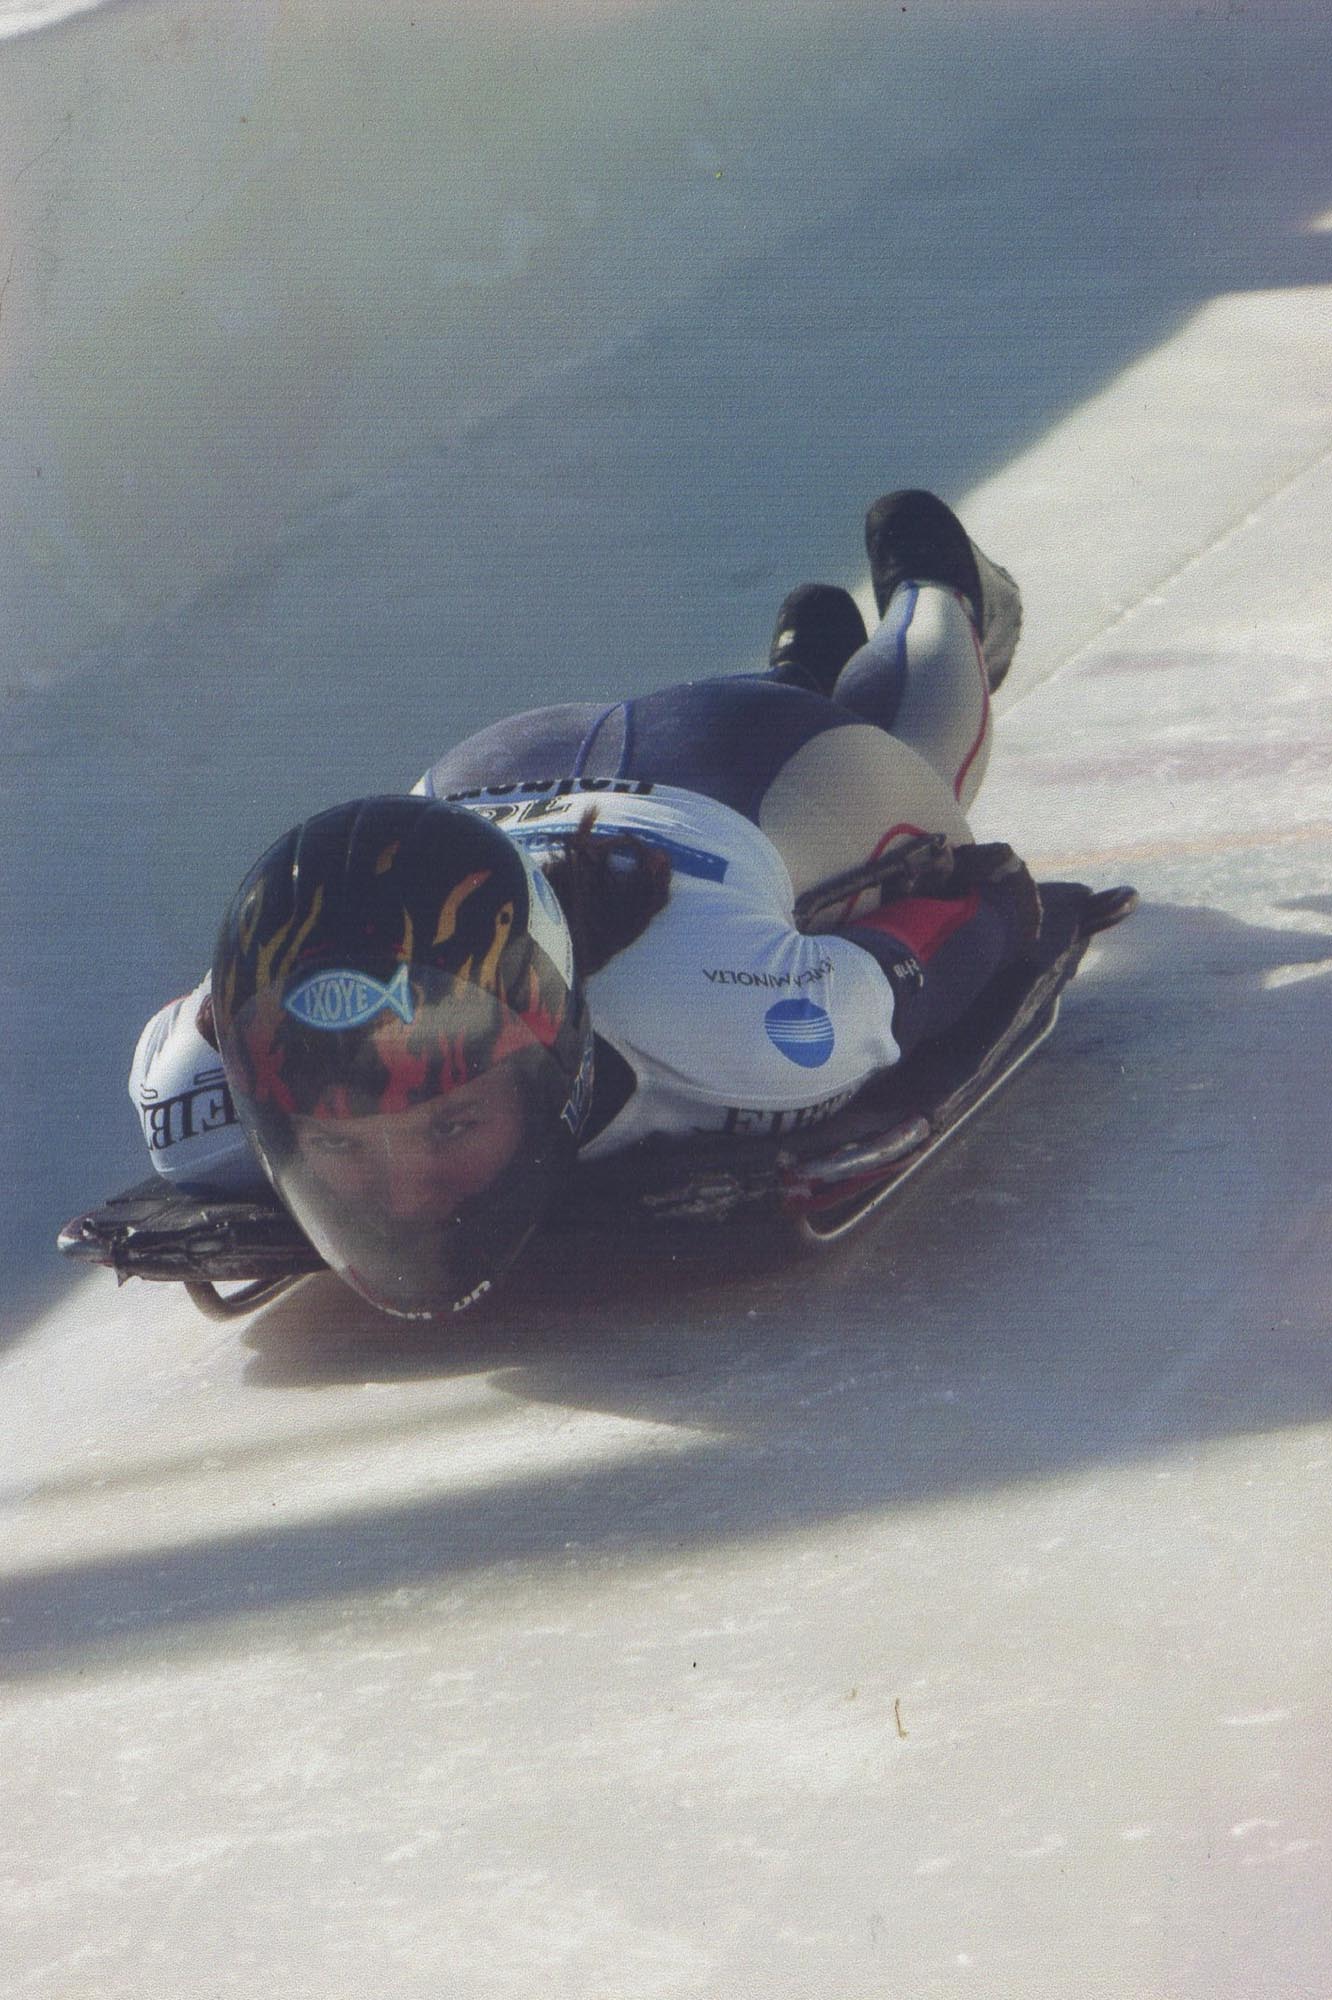 Parsley-Davenport going down a skeleton track